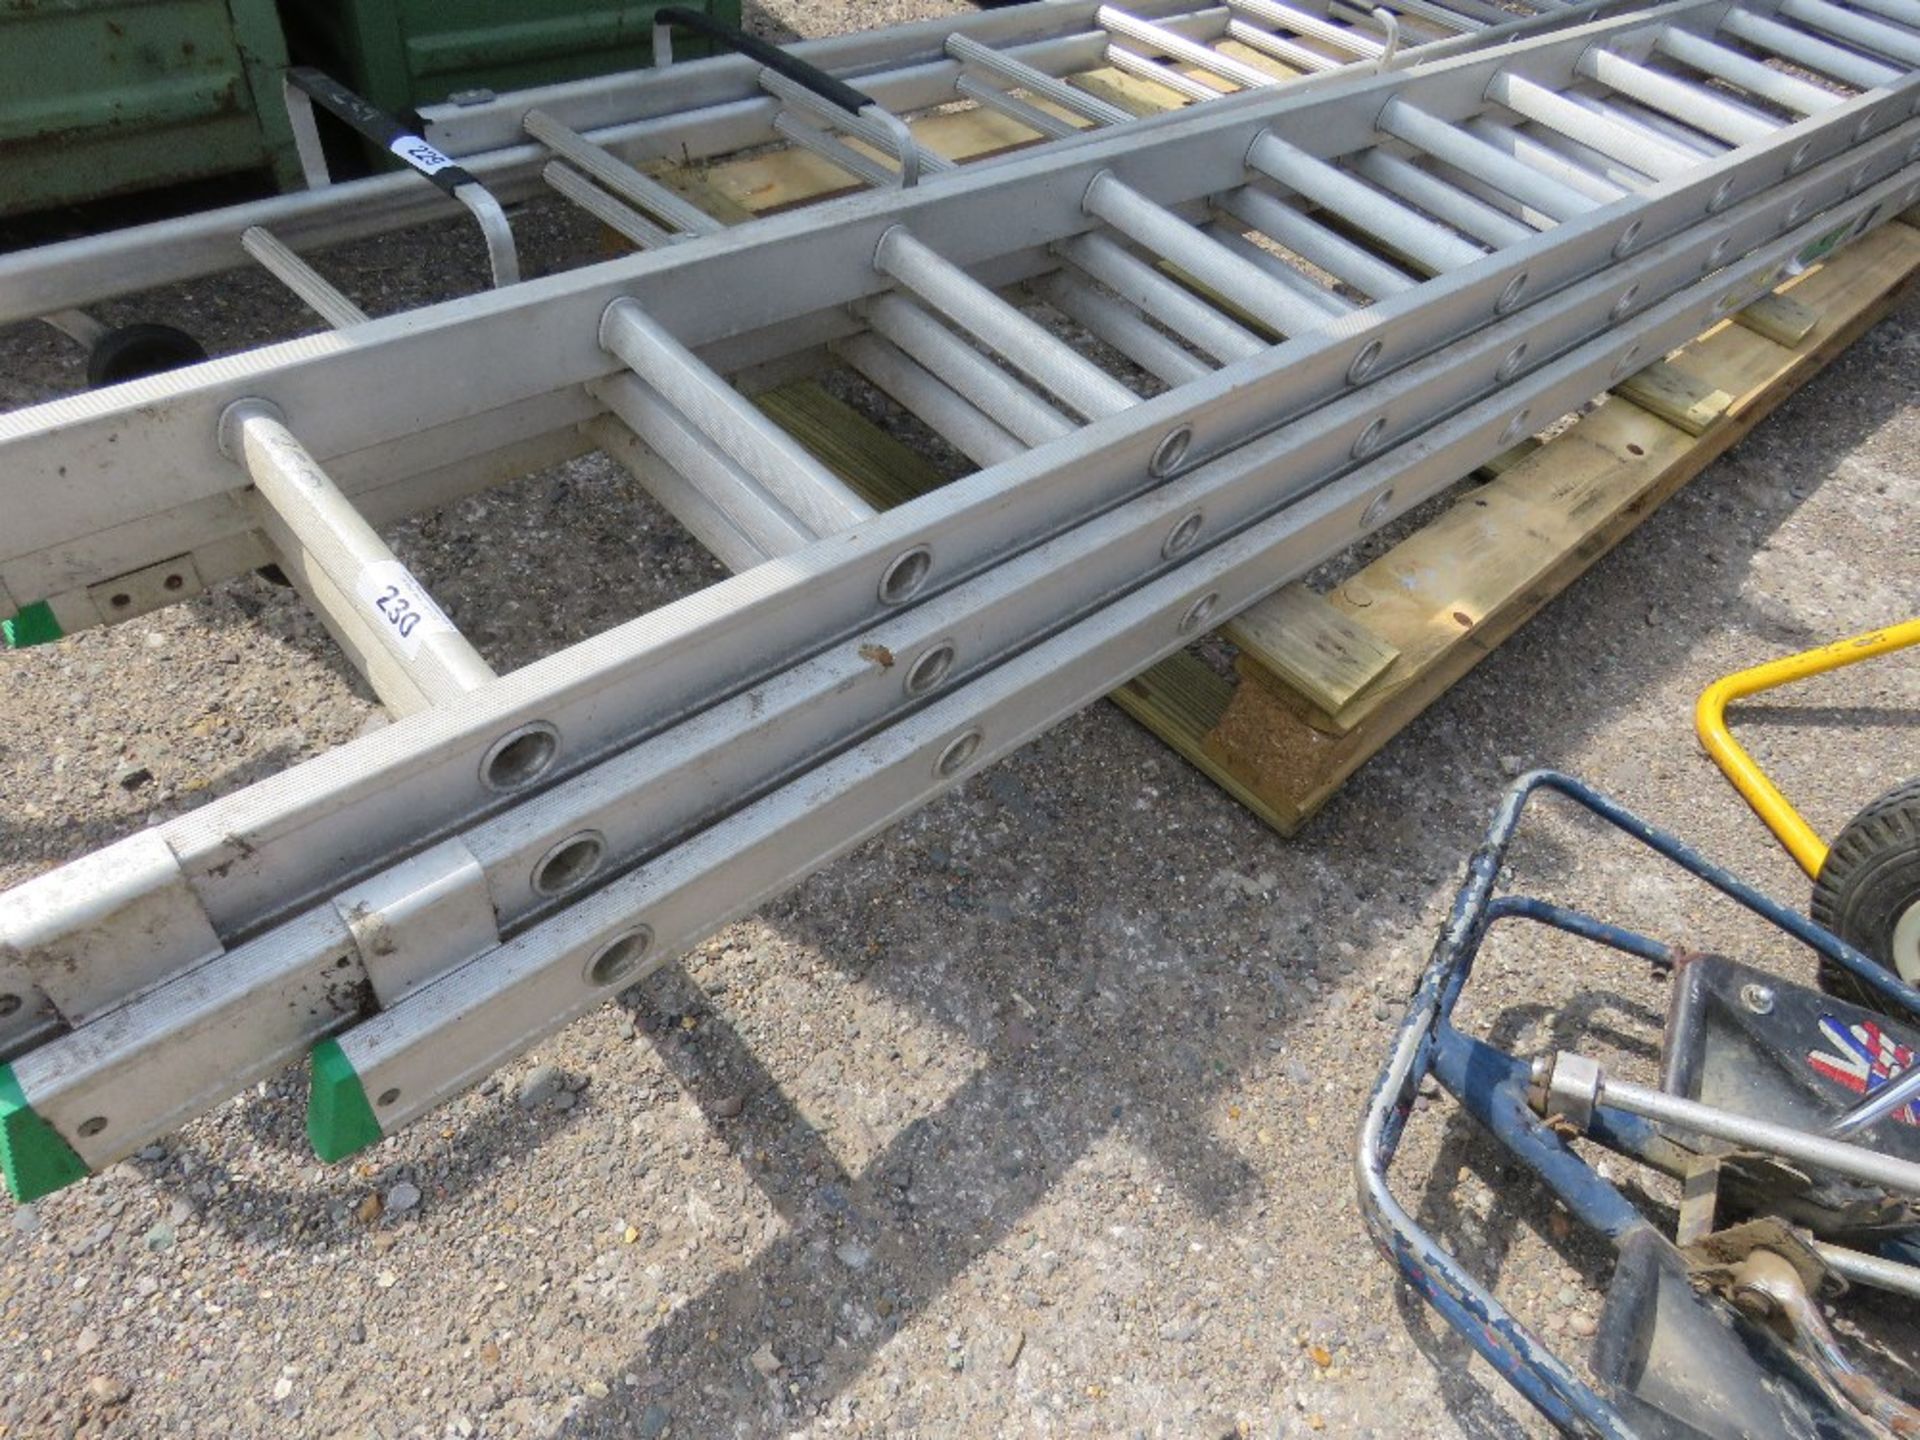 3 STAGE ALUMINIUM LADDER, 10FT CLOSED LENGTH APPROX.